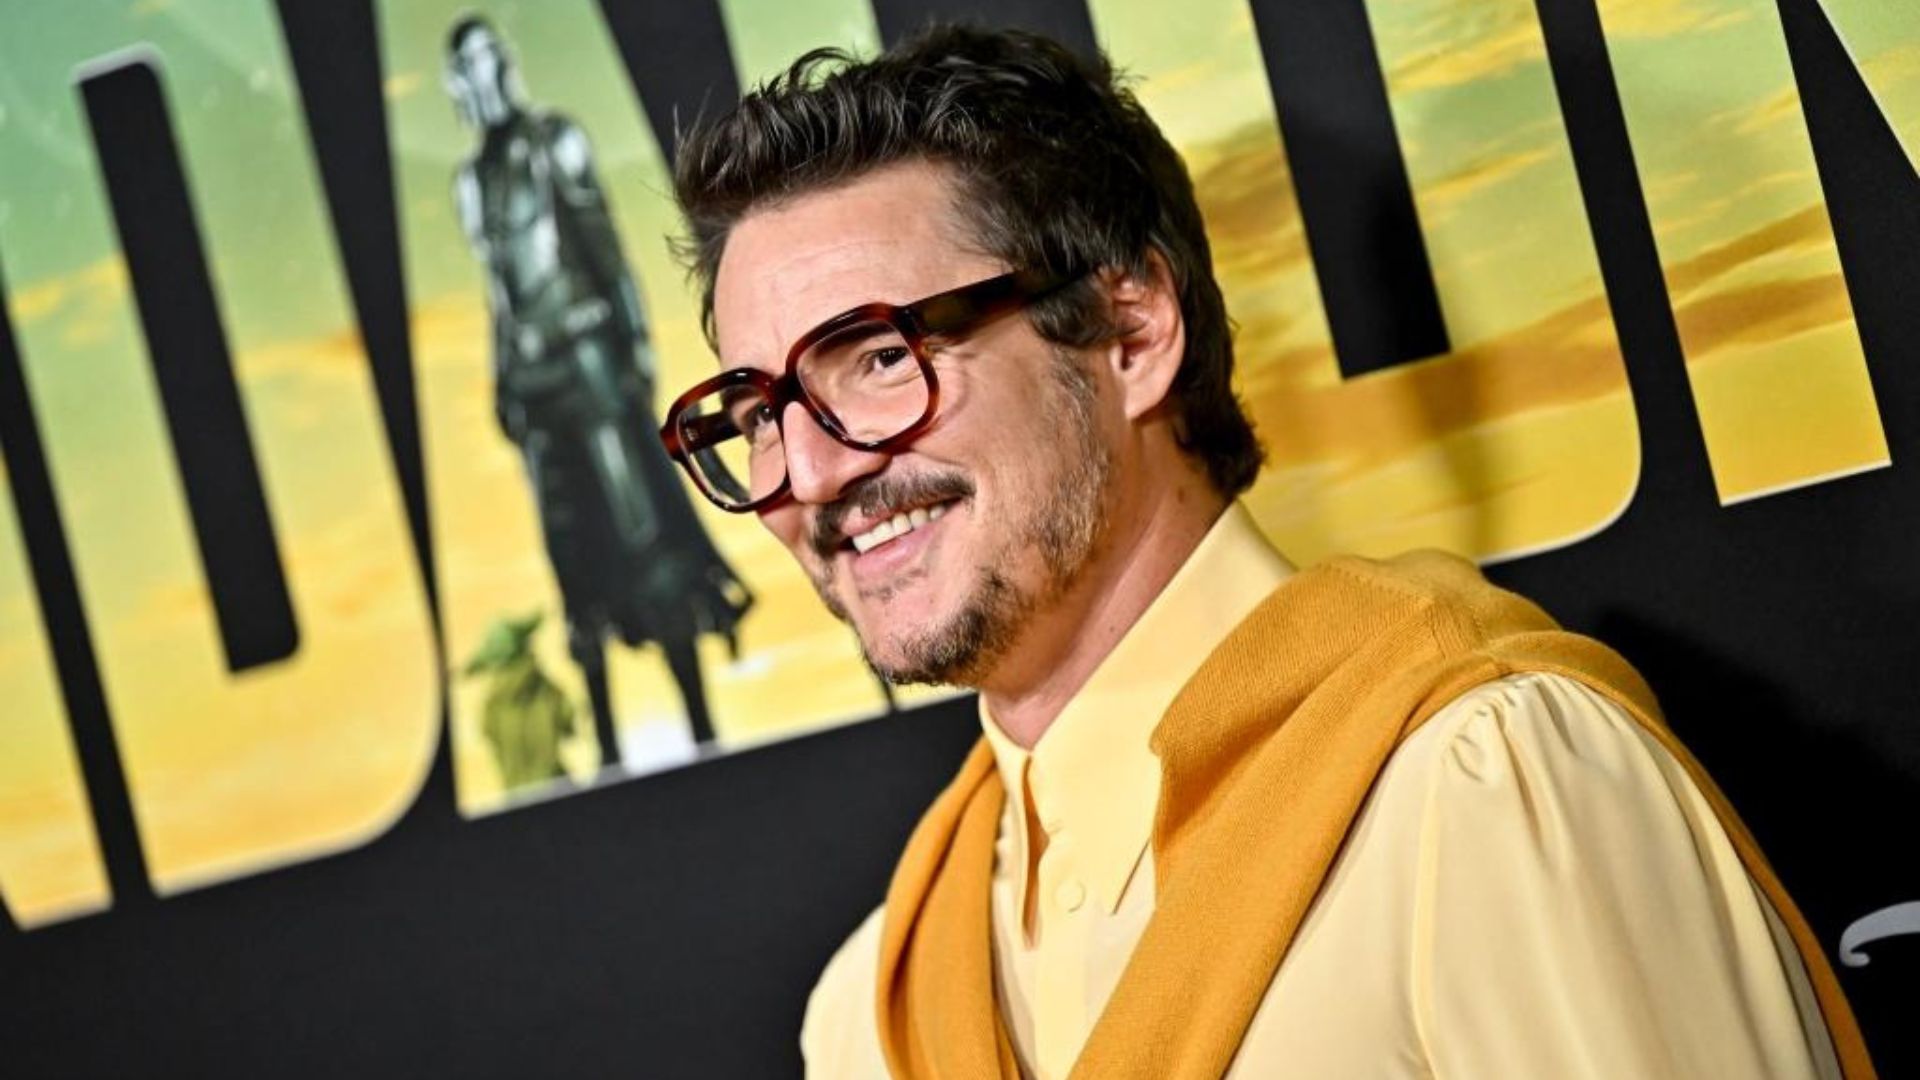 Pedro Pascal Daddy? - Pedro Pascal: Why Audiences Are Calling Their New Celebrity Crush “Daddy Pascal”?